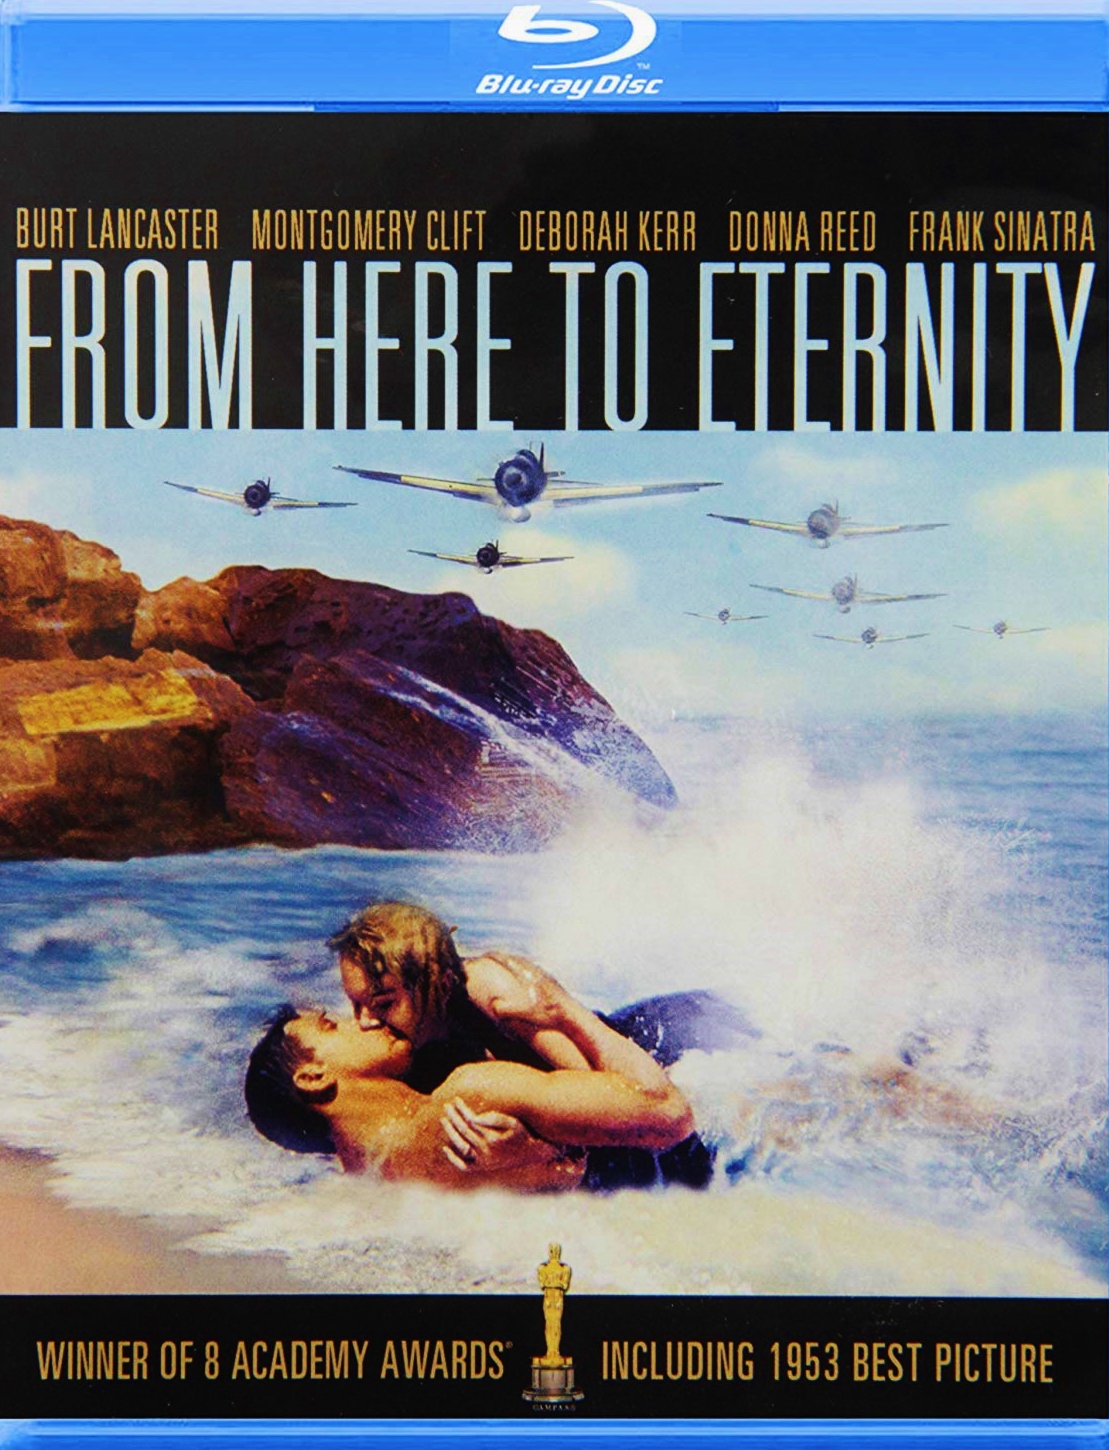 FROM HERE TO ETERNITY Blu-ray (Columbia, 1953) Sony Home Entertainment image